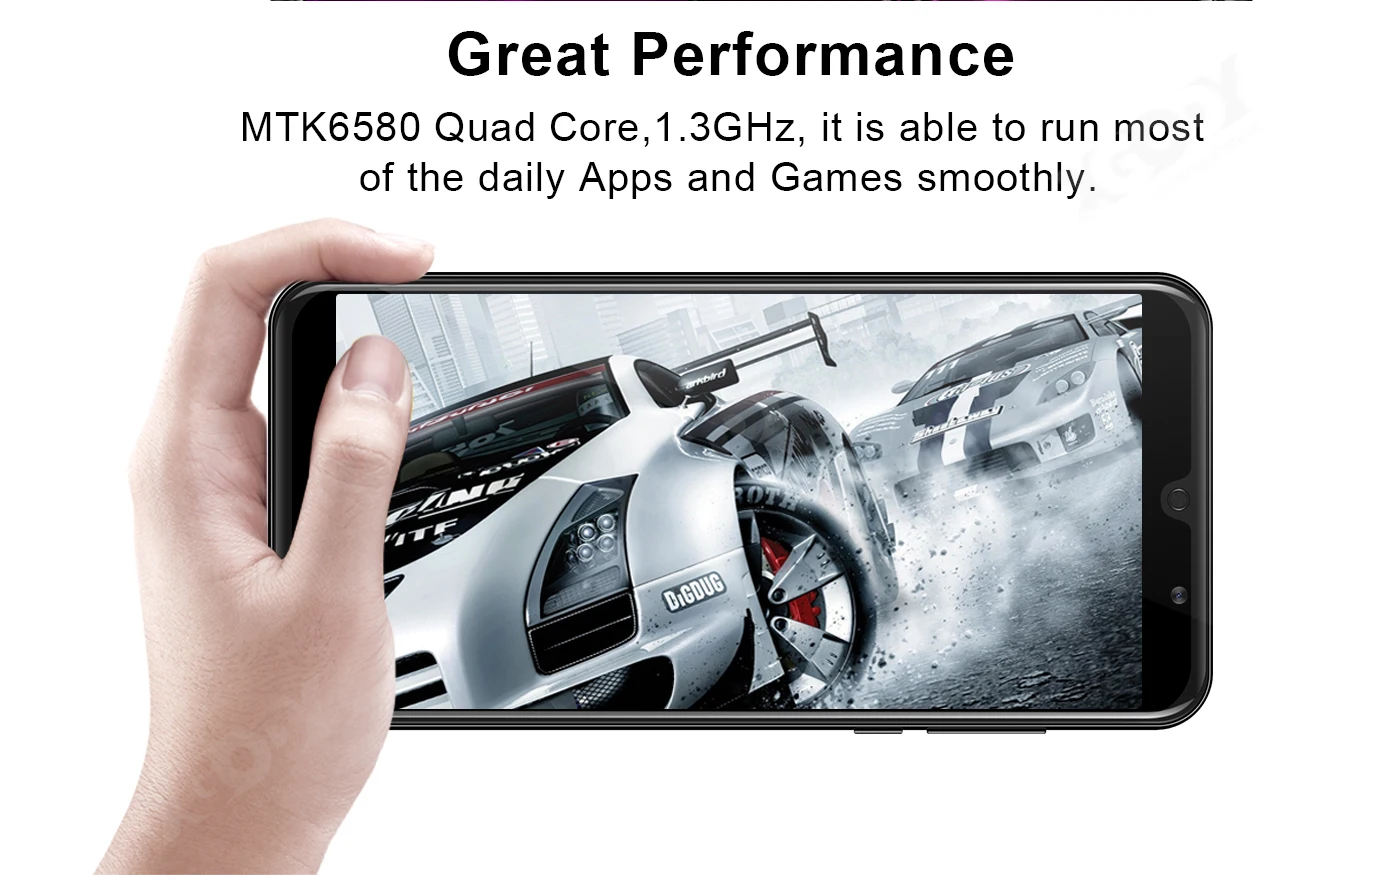 best gaming cellphones XGODY Celular Smartphone Android 8.1 6 Inch MTK6580 Quad Core 2GB 16GB Cell Phone Dual SIM 5MP Camera GPS WiFi 3G Mobile Phones best android cell phone